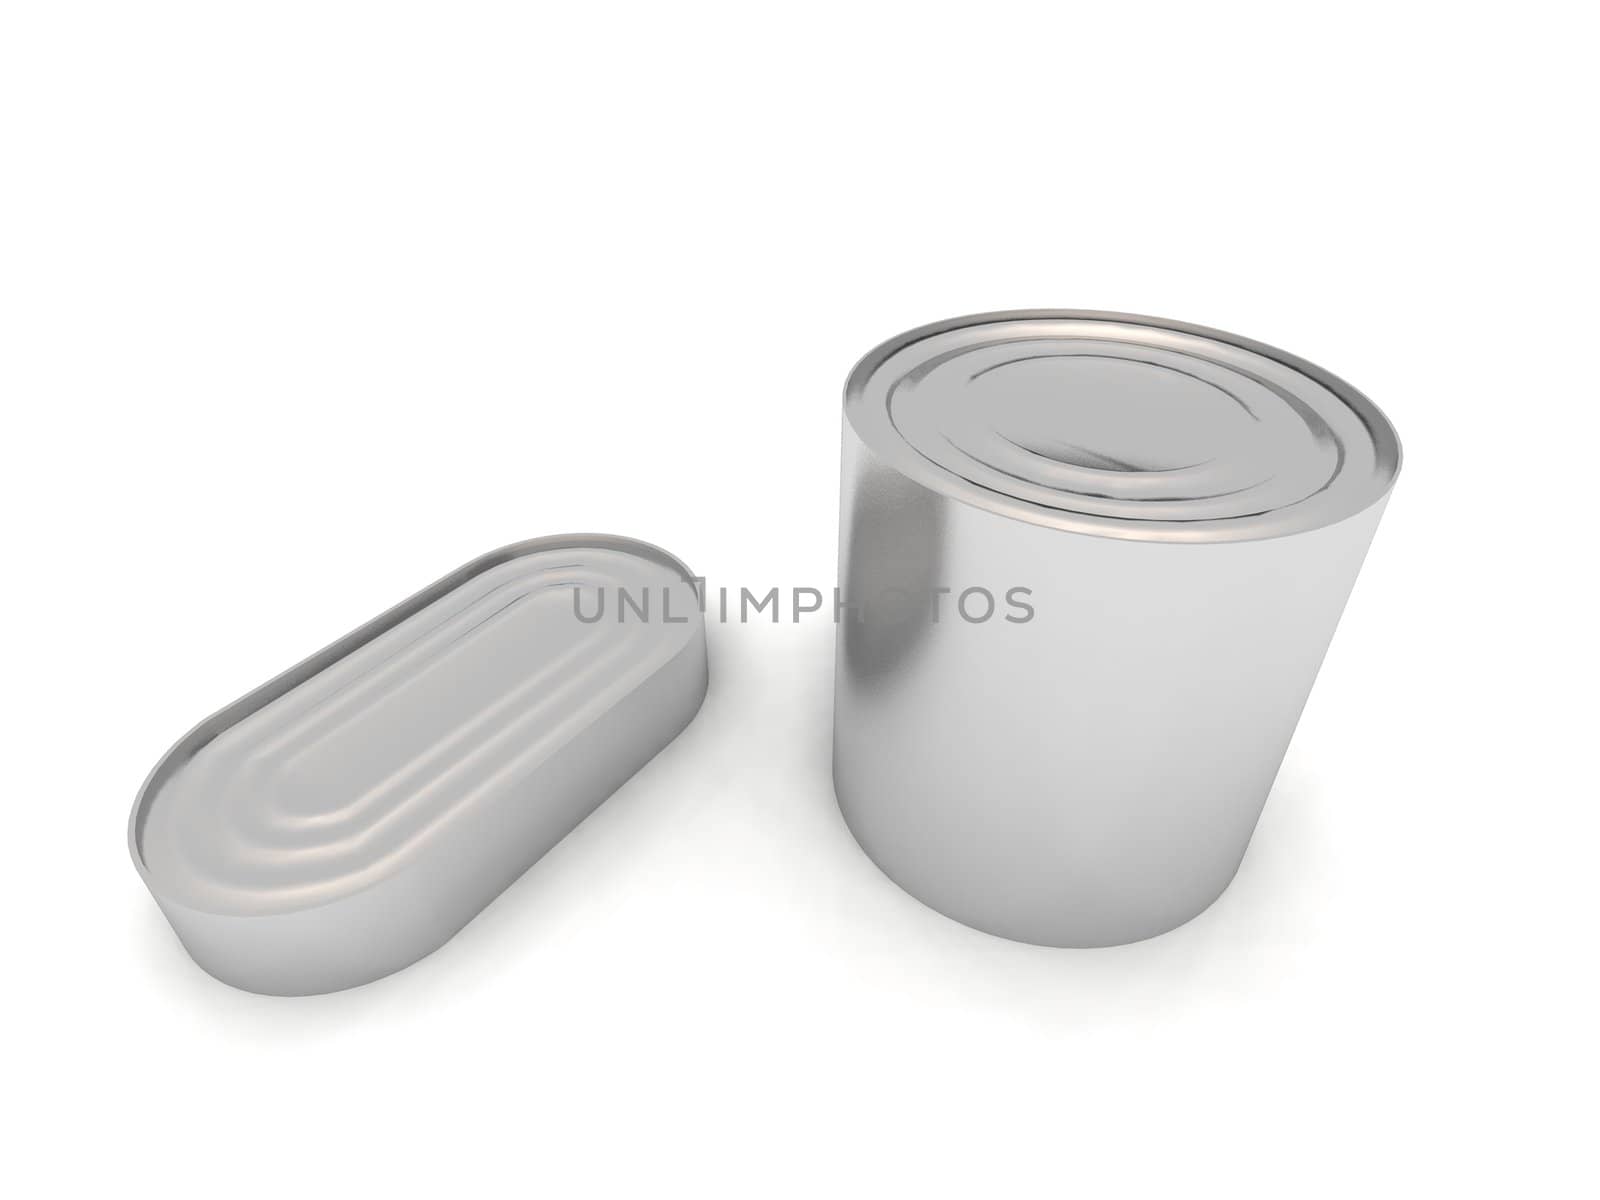 a 3d render of two food cans on a white background